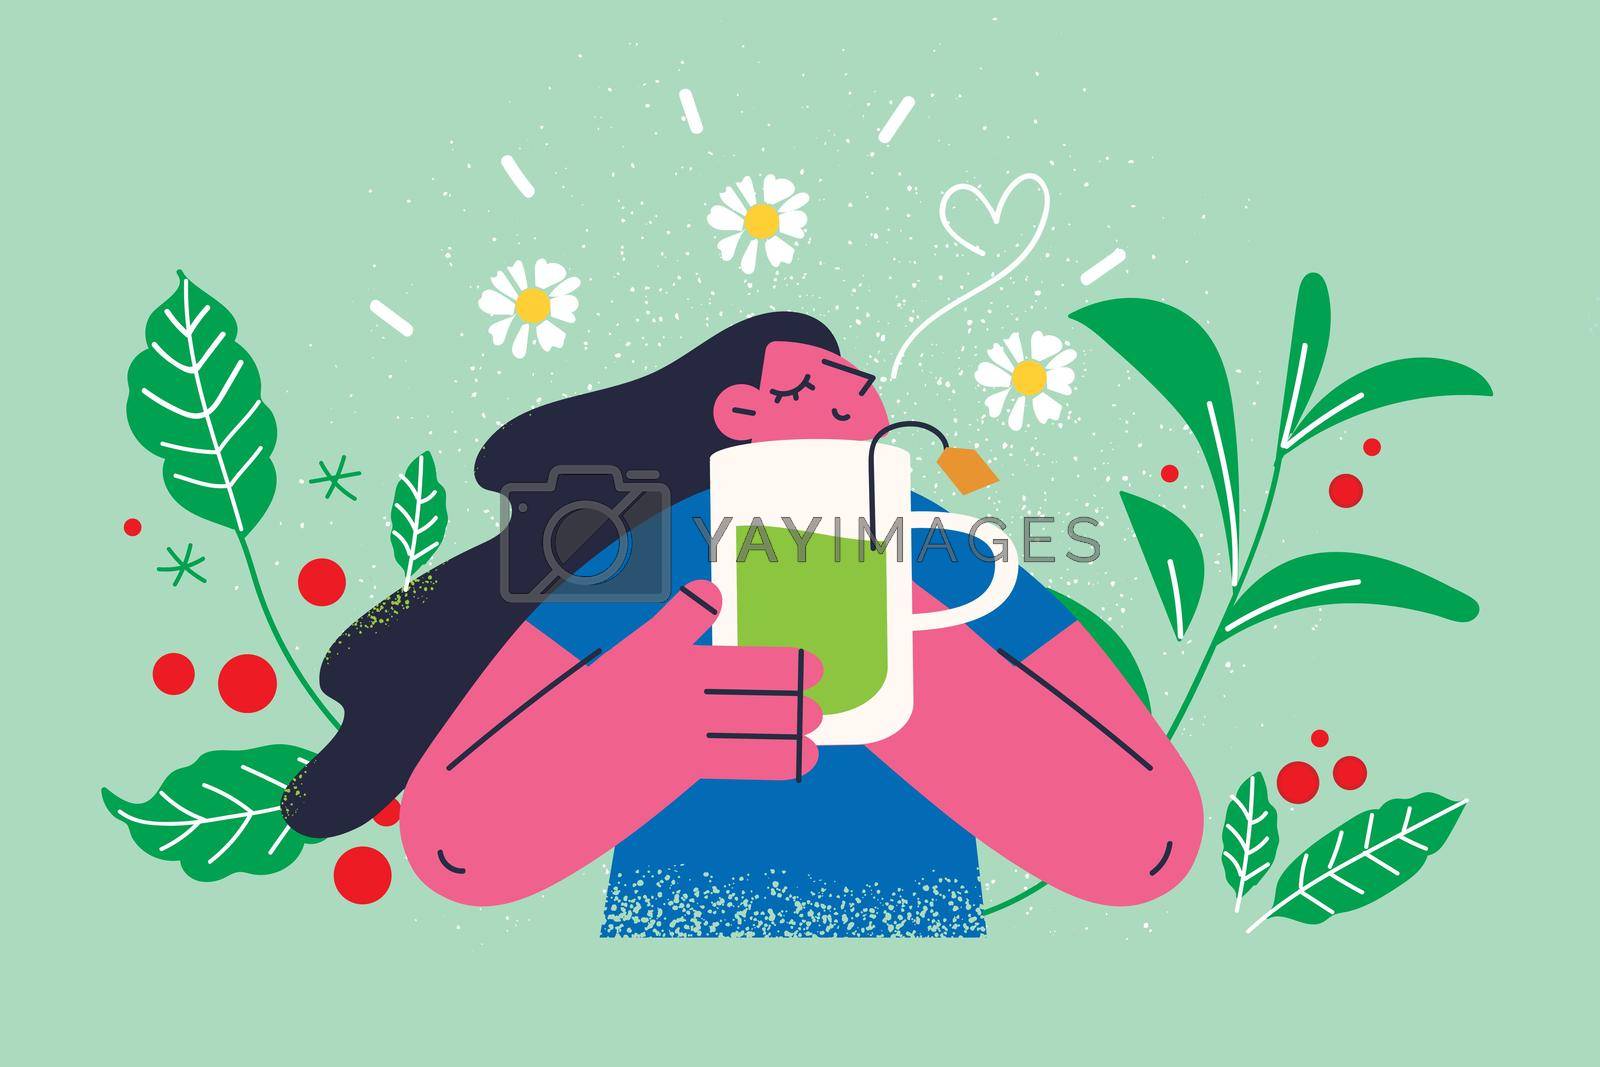 Healthy drink and lifestyle concept. Young positive woman cartoon character standing holding glass of green fresh herbal tea feeling harmony with nature vector illustration